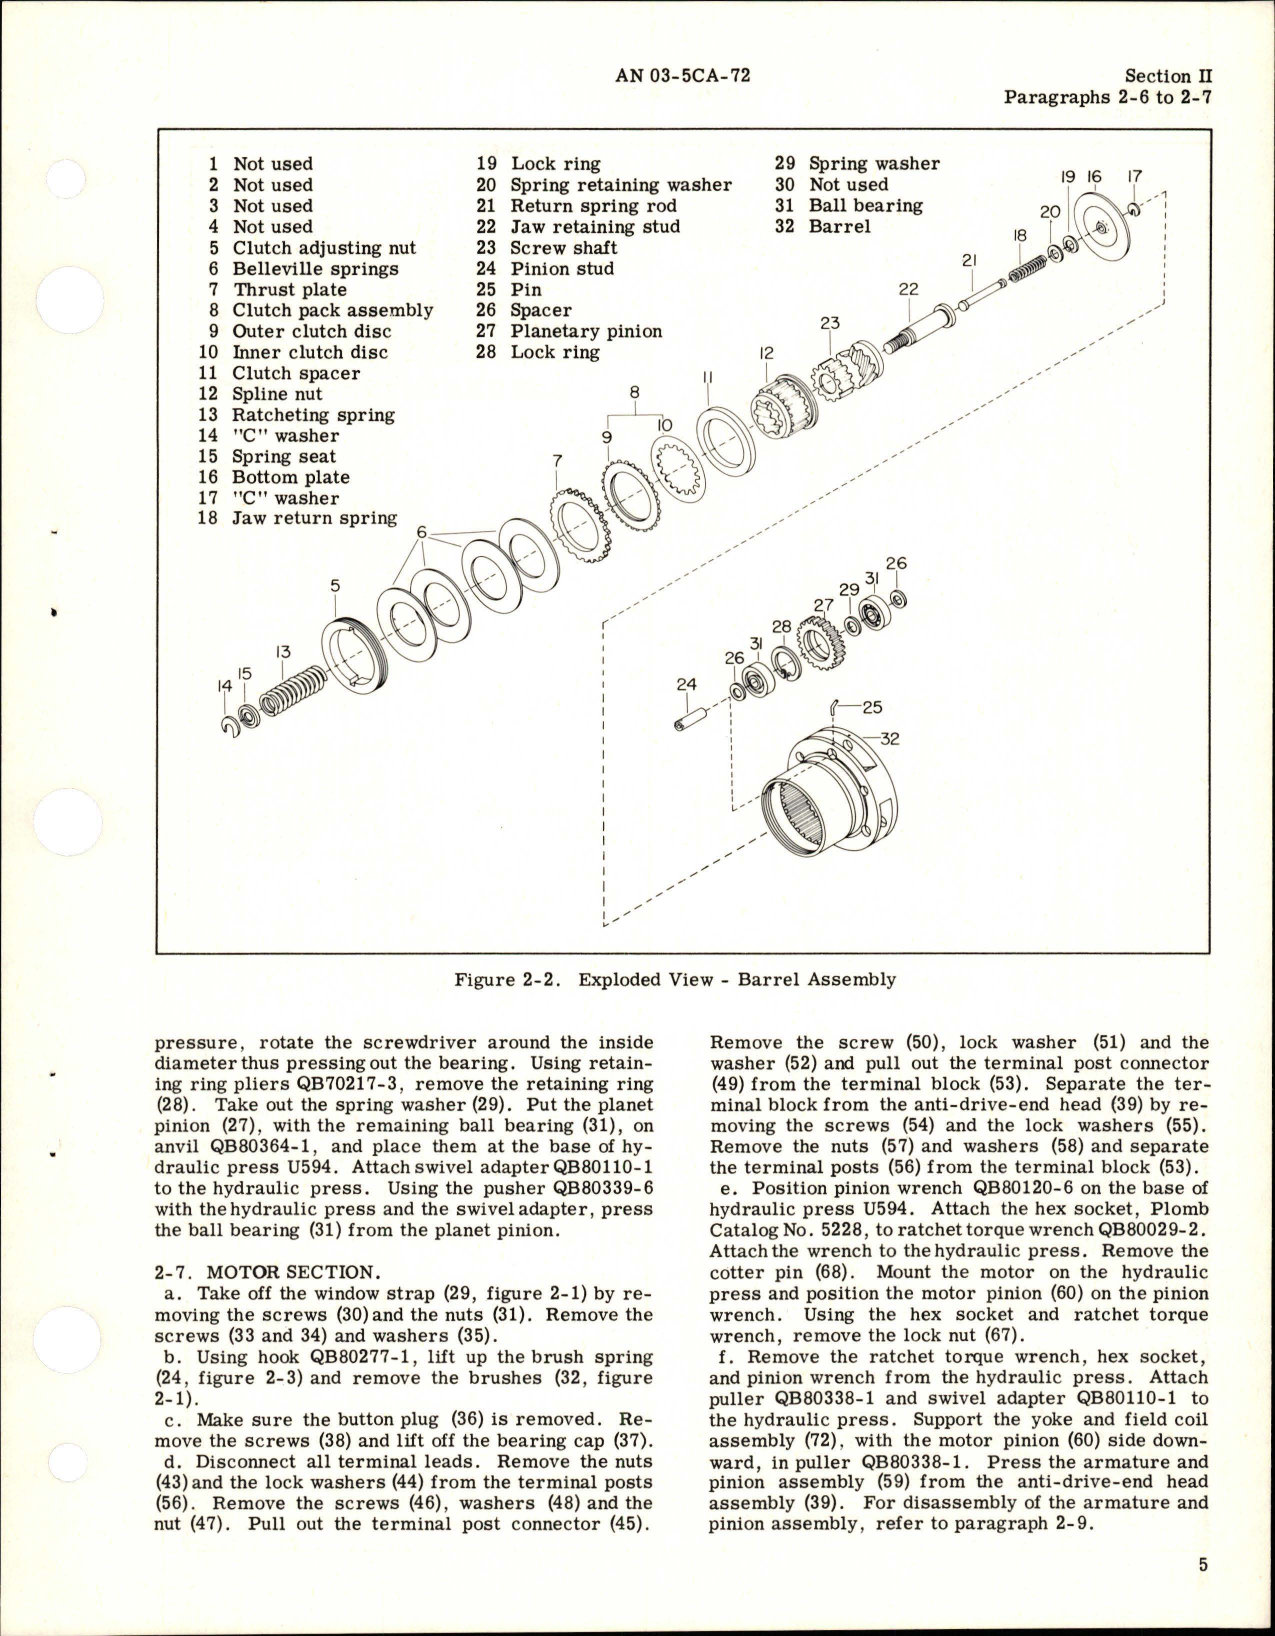 Sample page 9 from AirCorps Library document: Overhaul Instructions for Starters